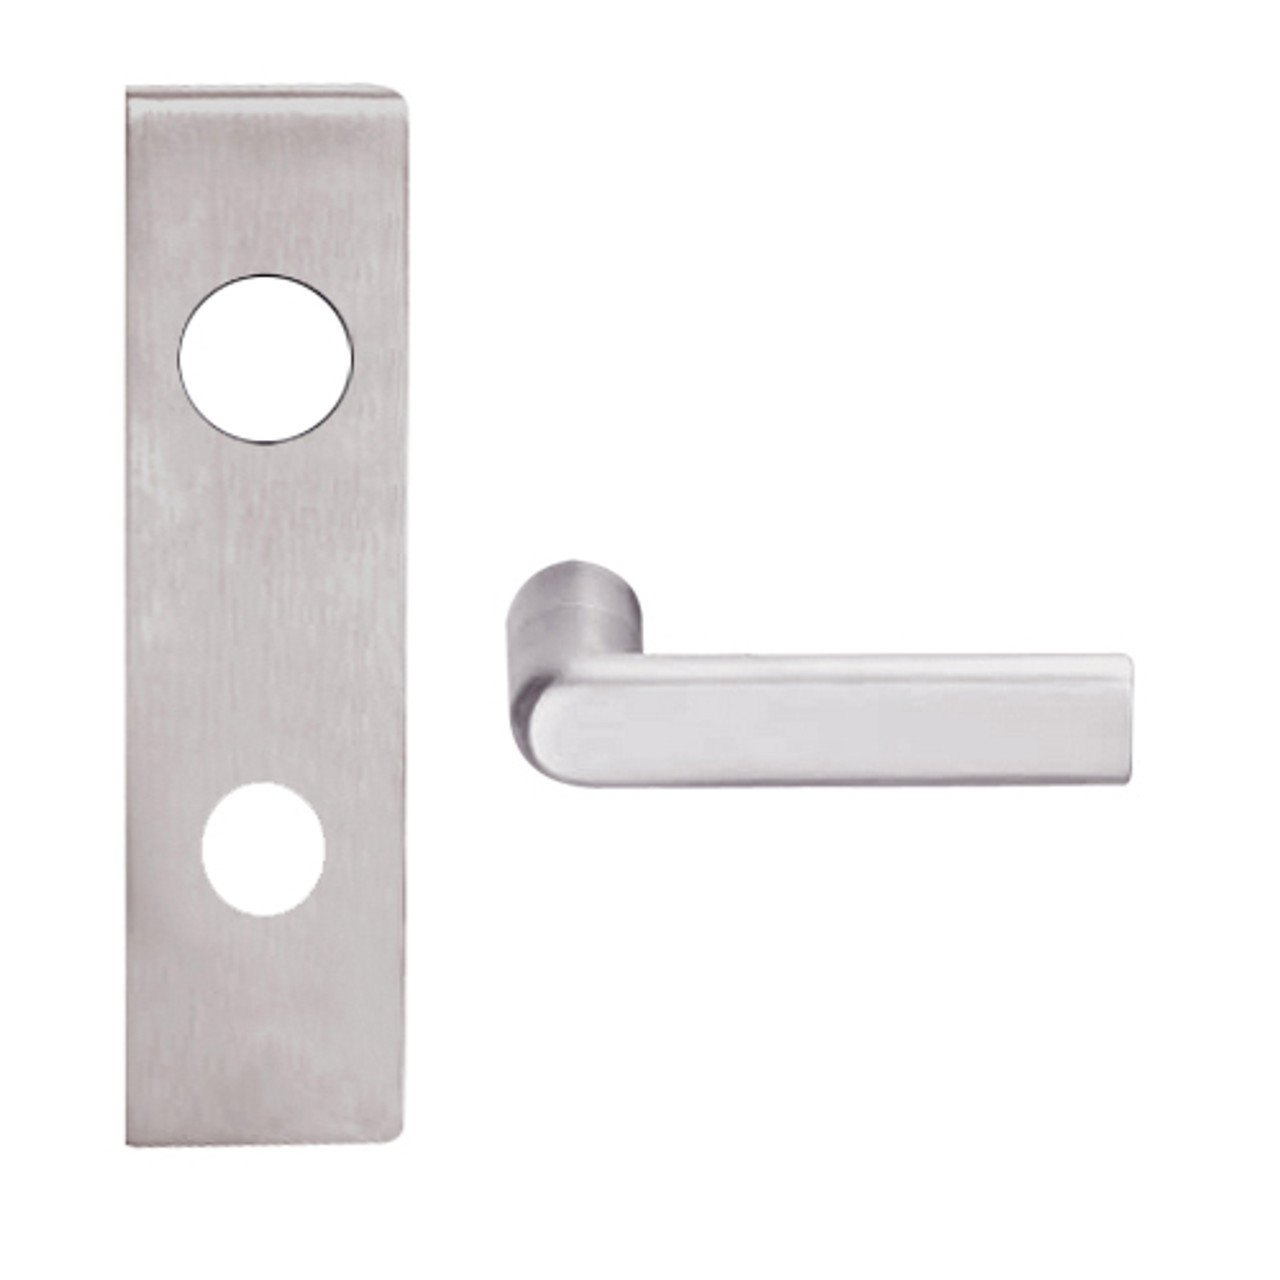 L9026J-01N-630 Schlage L Series Exit Lock with Cylinder Commercial Mortise Lock with 01 Cast Lever Design Prepped for FSIC in Satin Stainless Steel